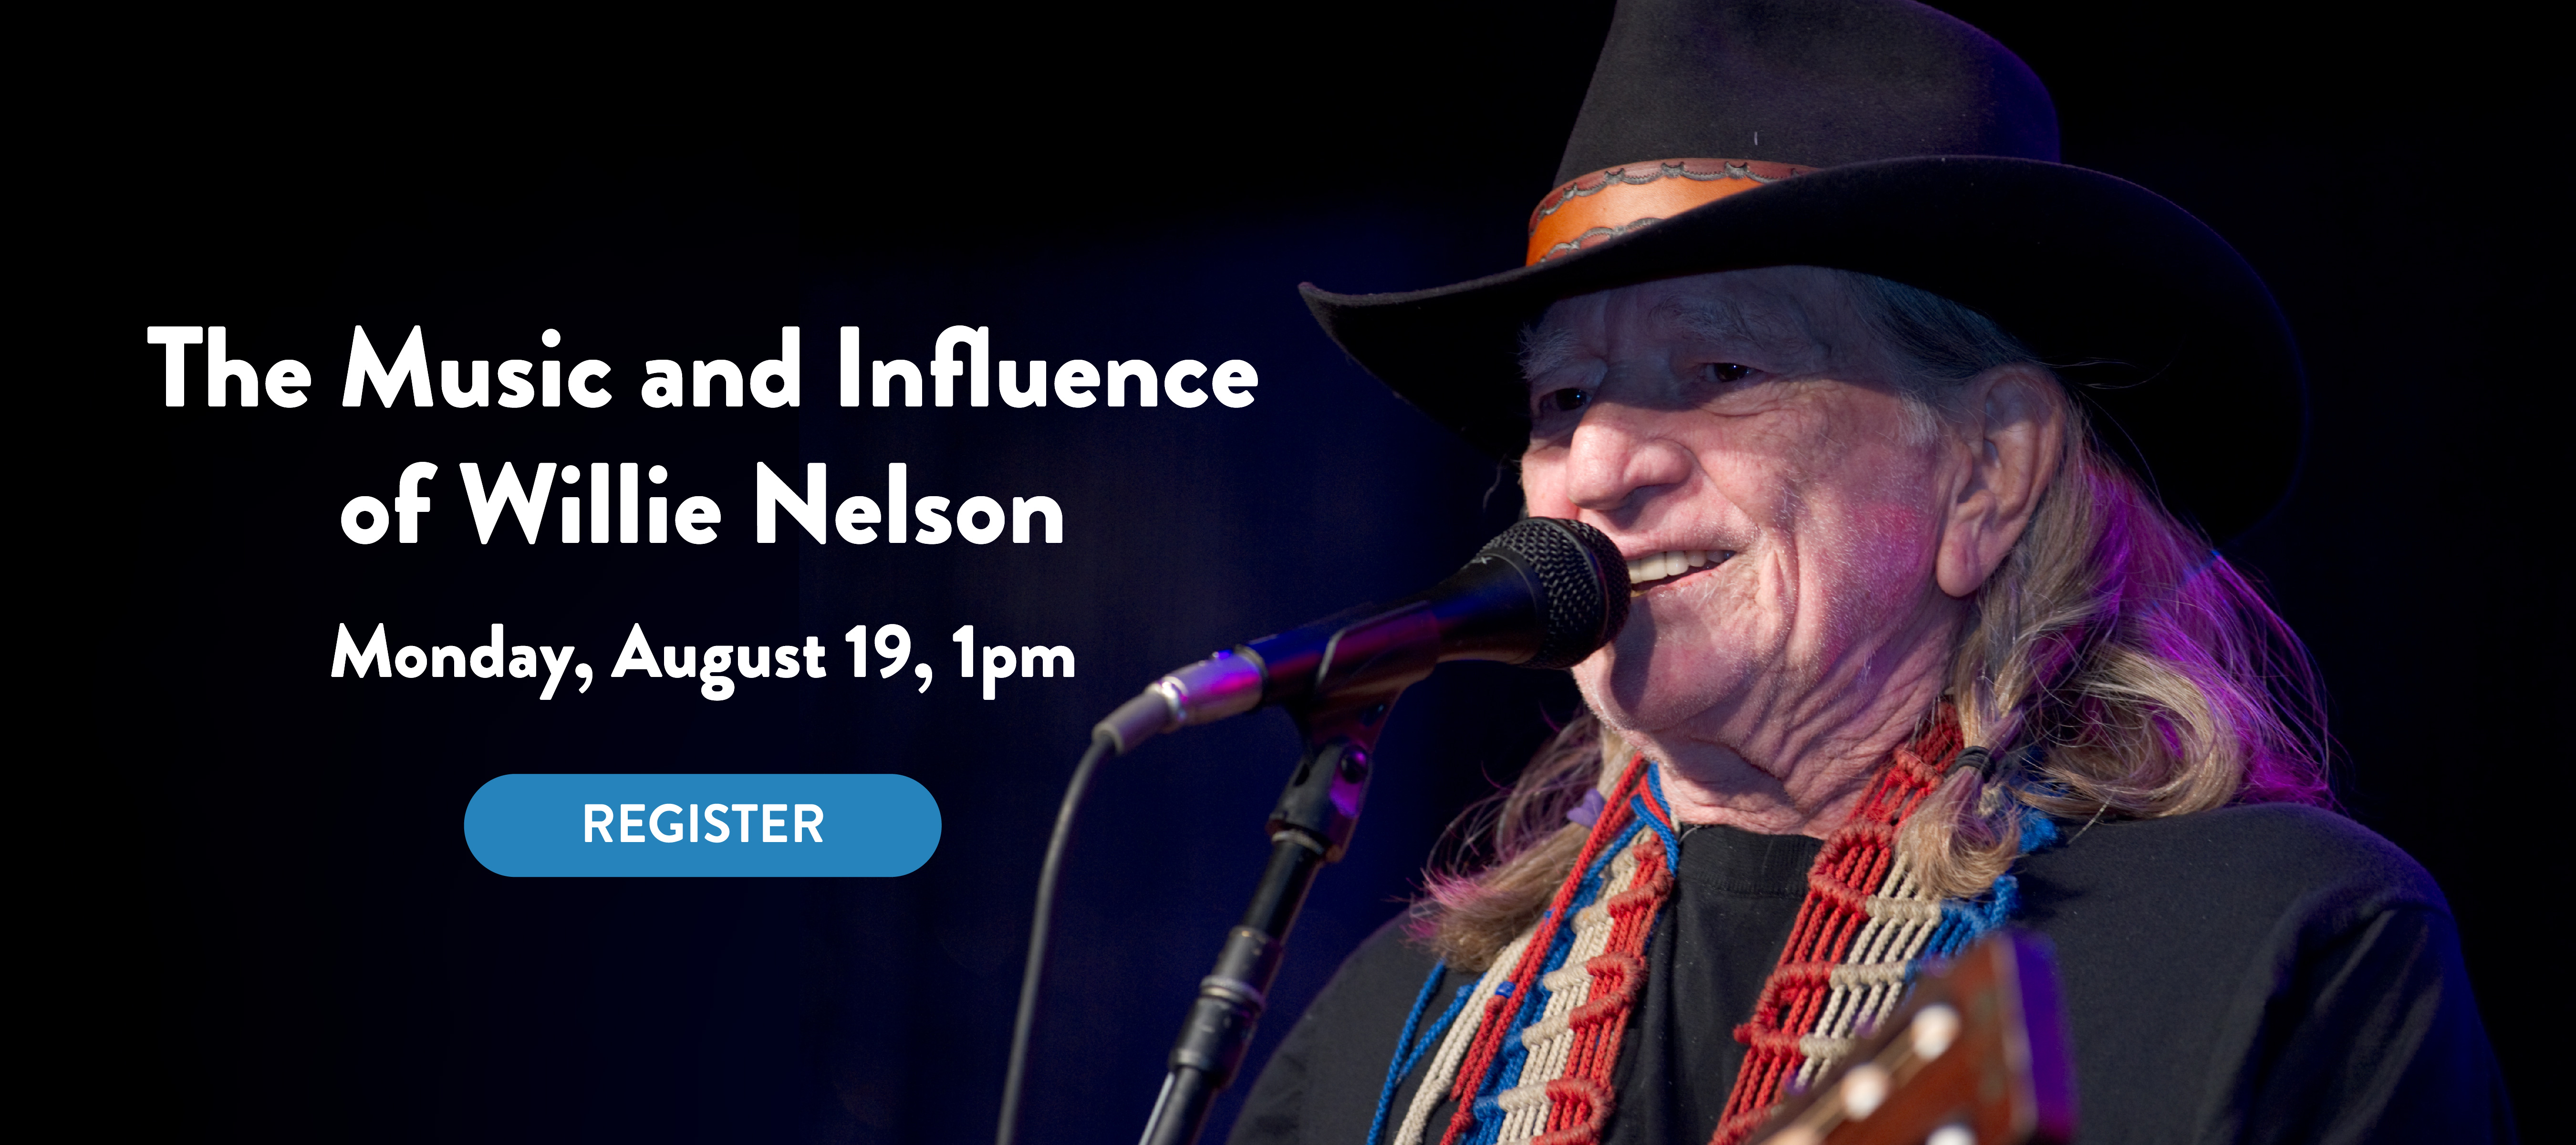 phpl, Prospect Heights Public Library, The Music and Influence of Willie Nelson, singer, songwriter, learn about music, overview, legendary musician, country music, Adult 